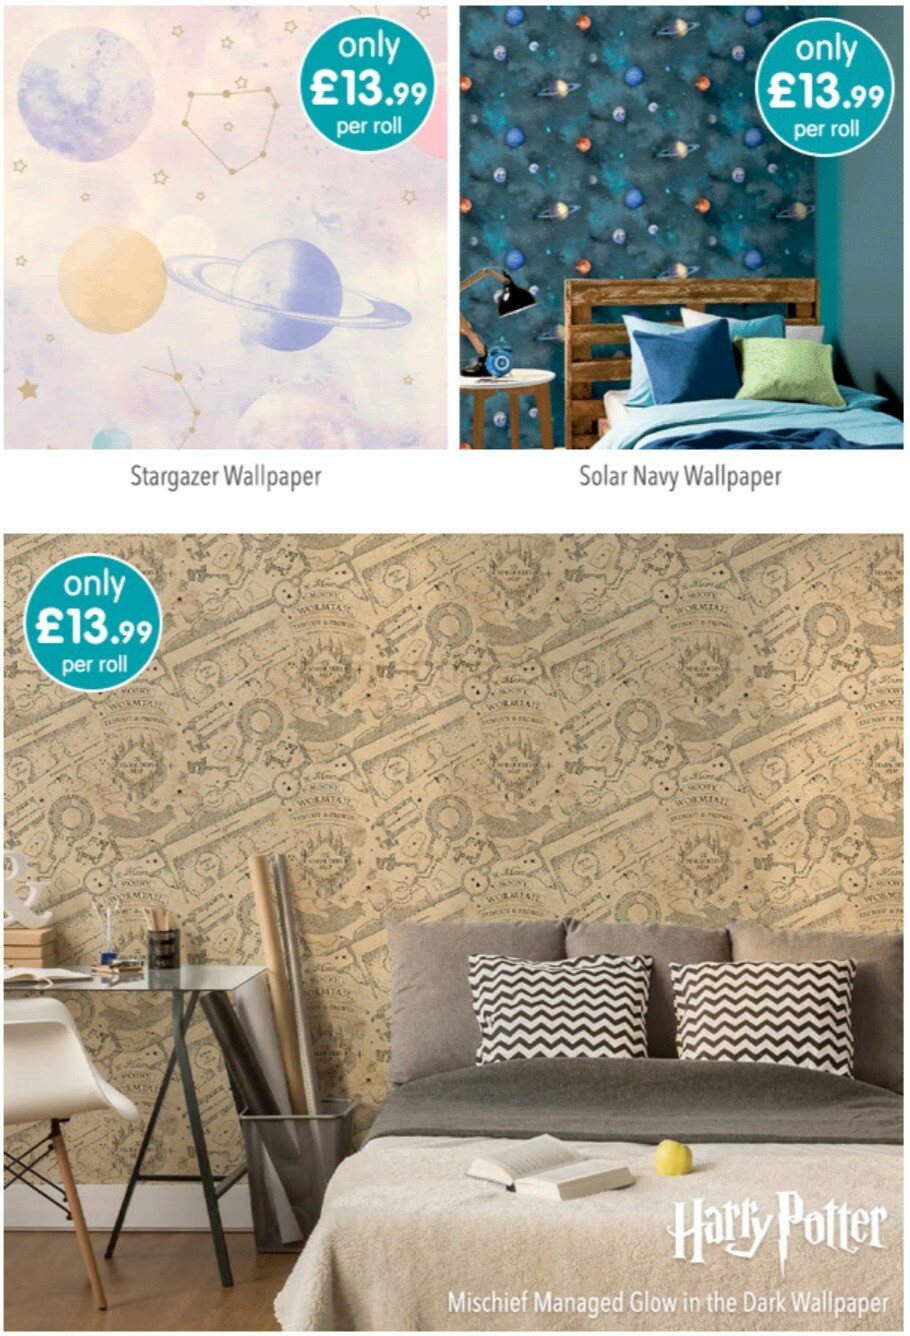 B&M NEW Season Wallpaper Offers from 2 October